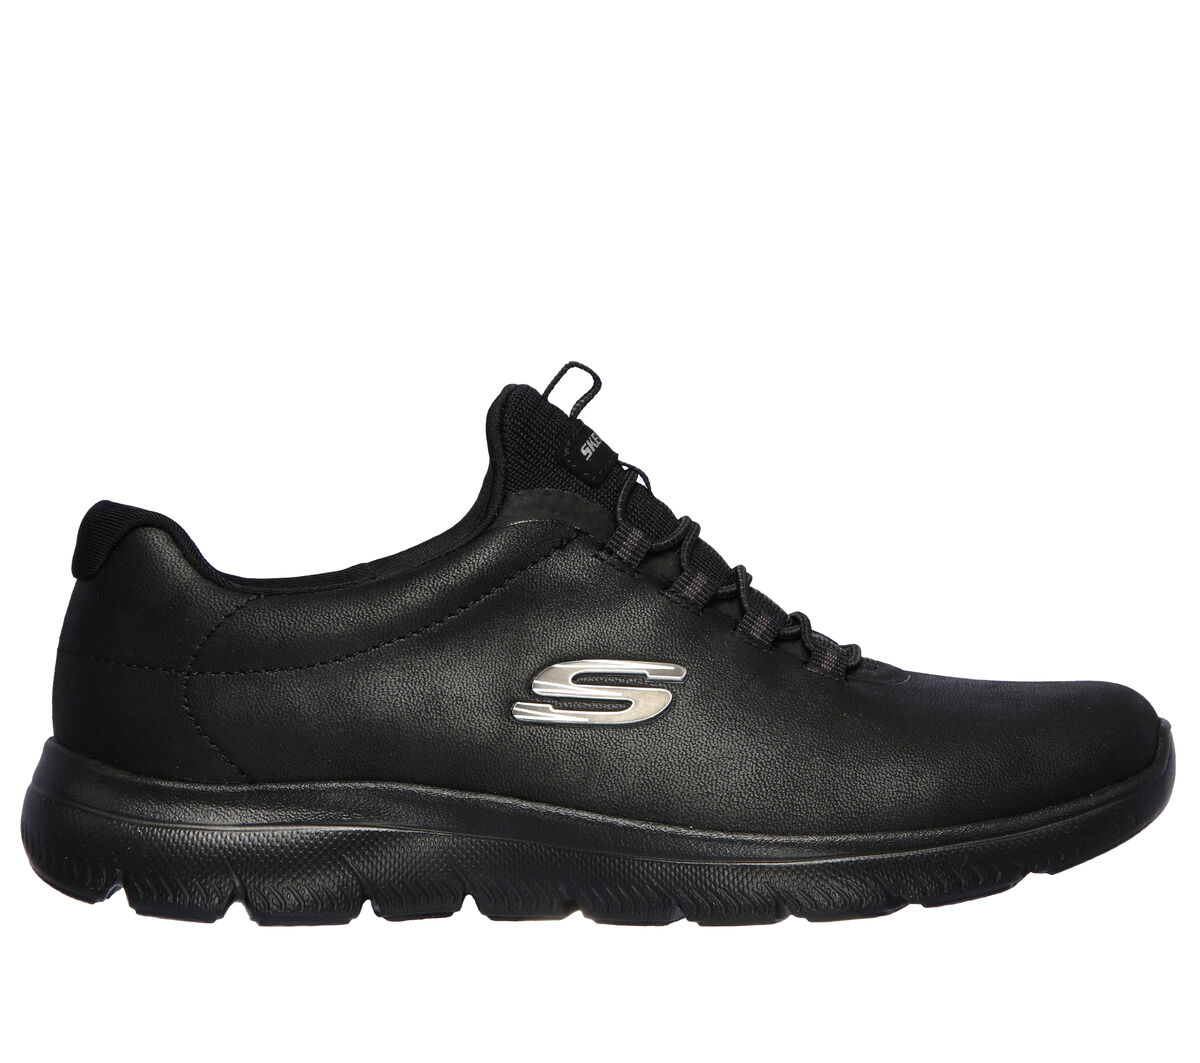 Summits Oh So Smooth SKECHERS